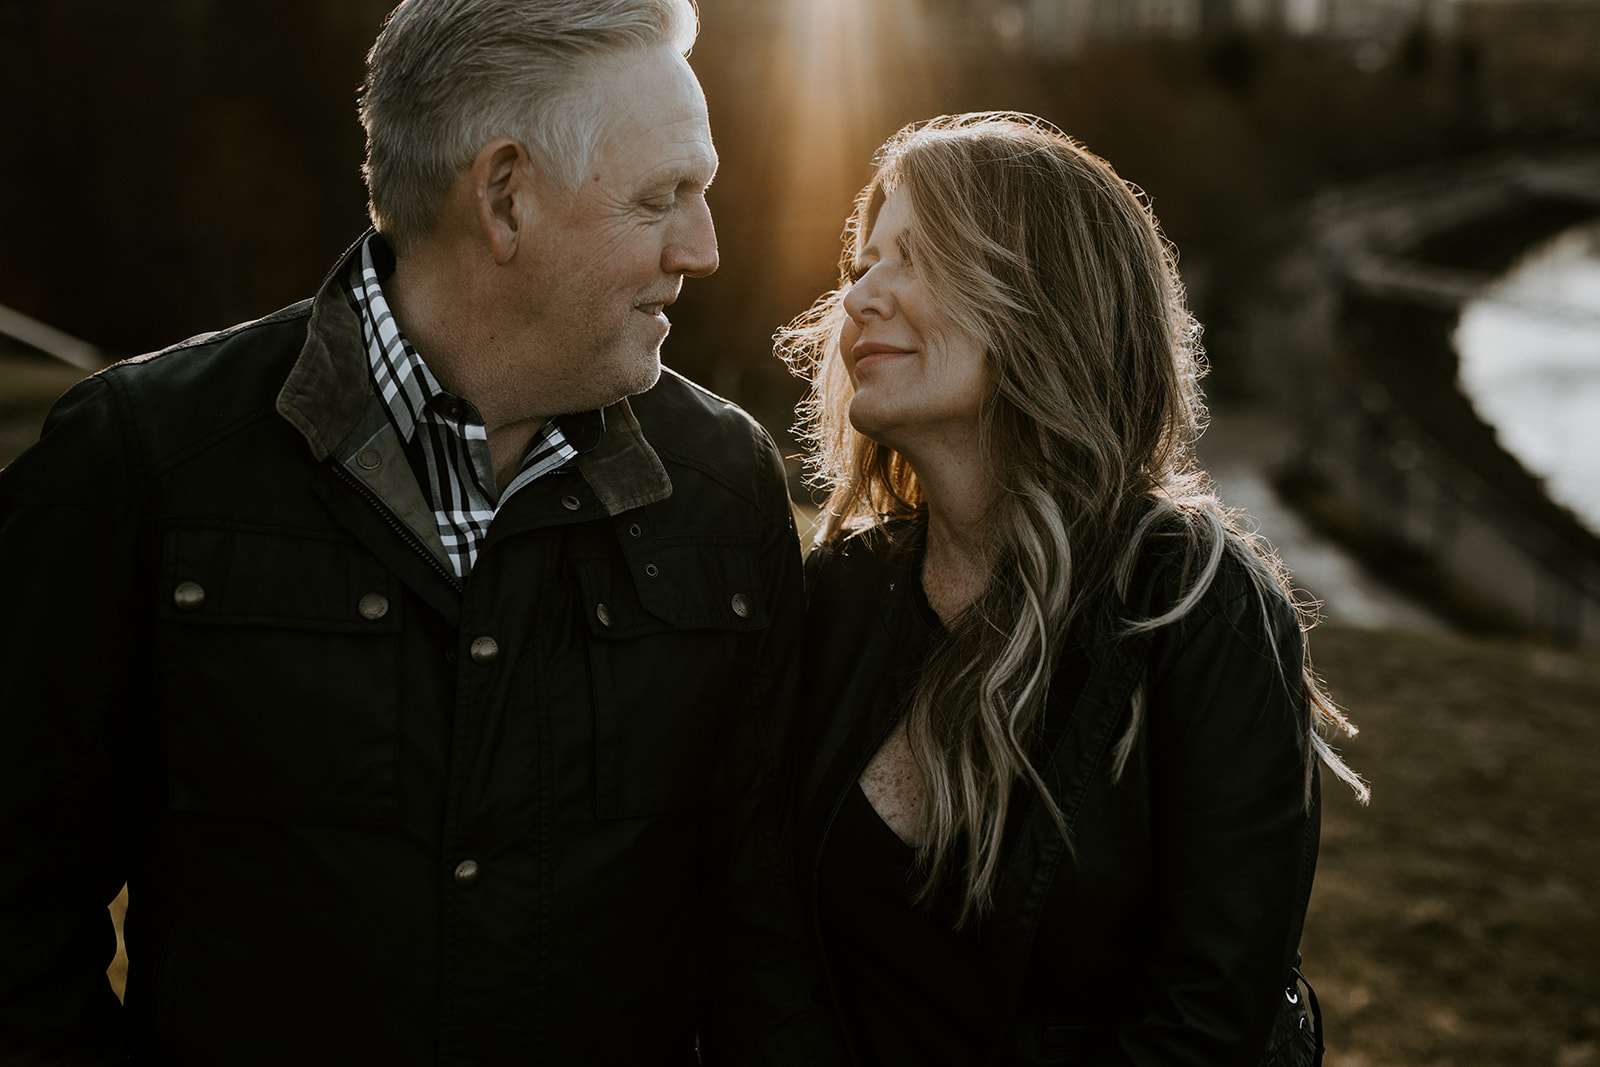 Vancouver Engagement Photography